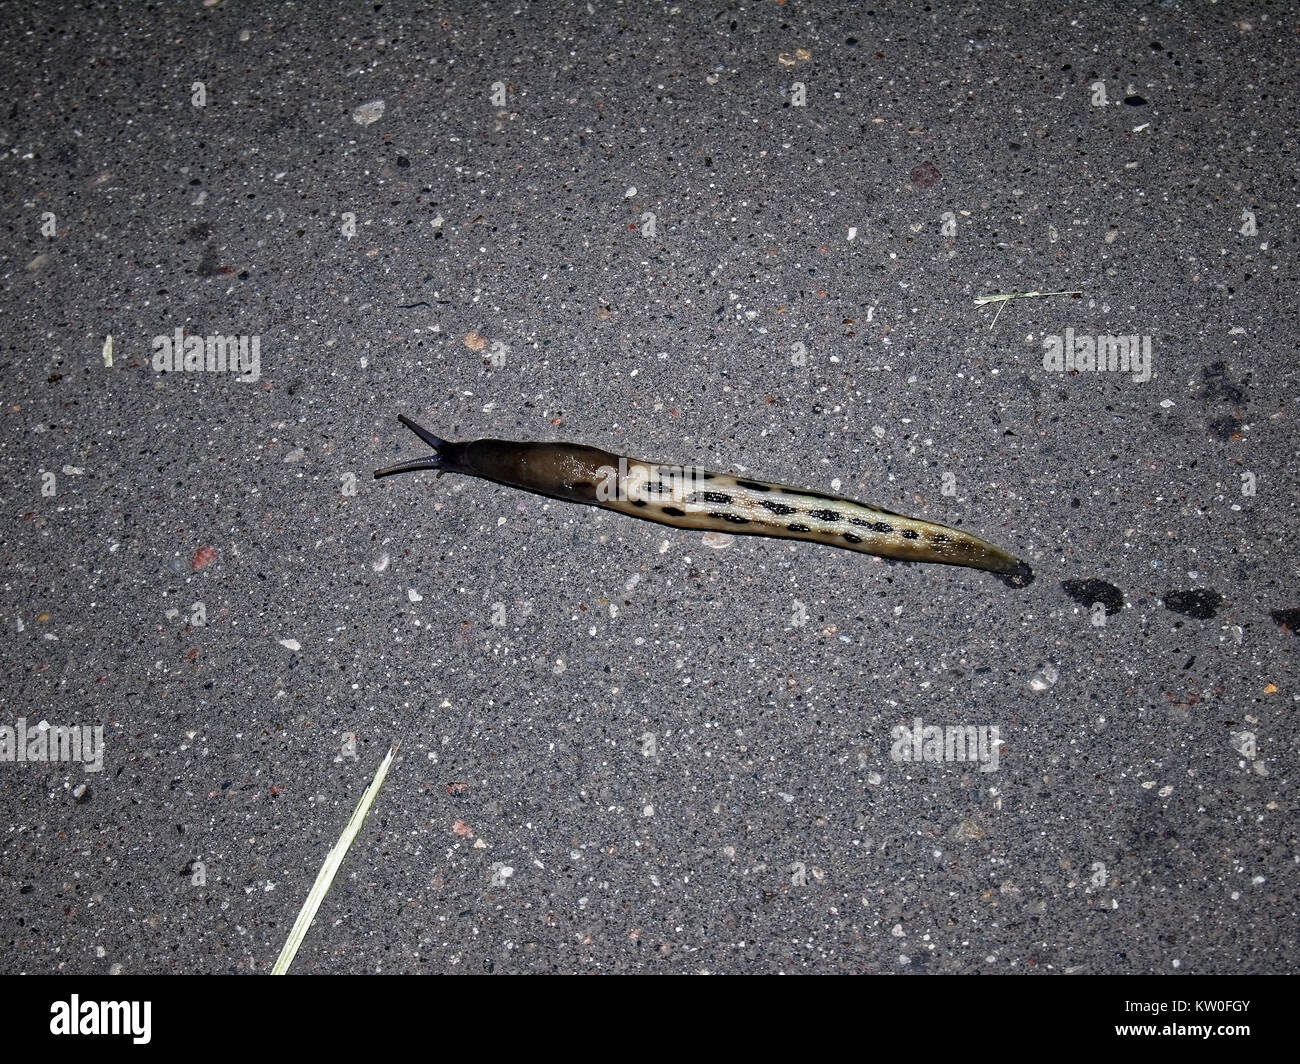 a snail without the shell on the pavement, Moscow Stock Photo